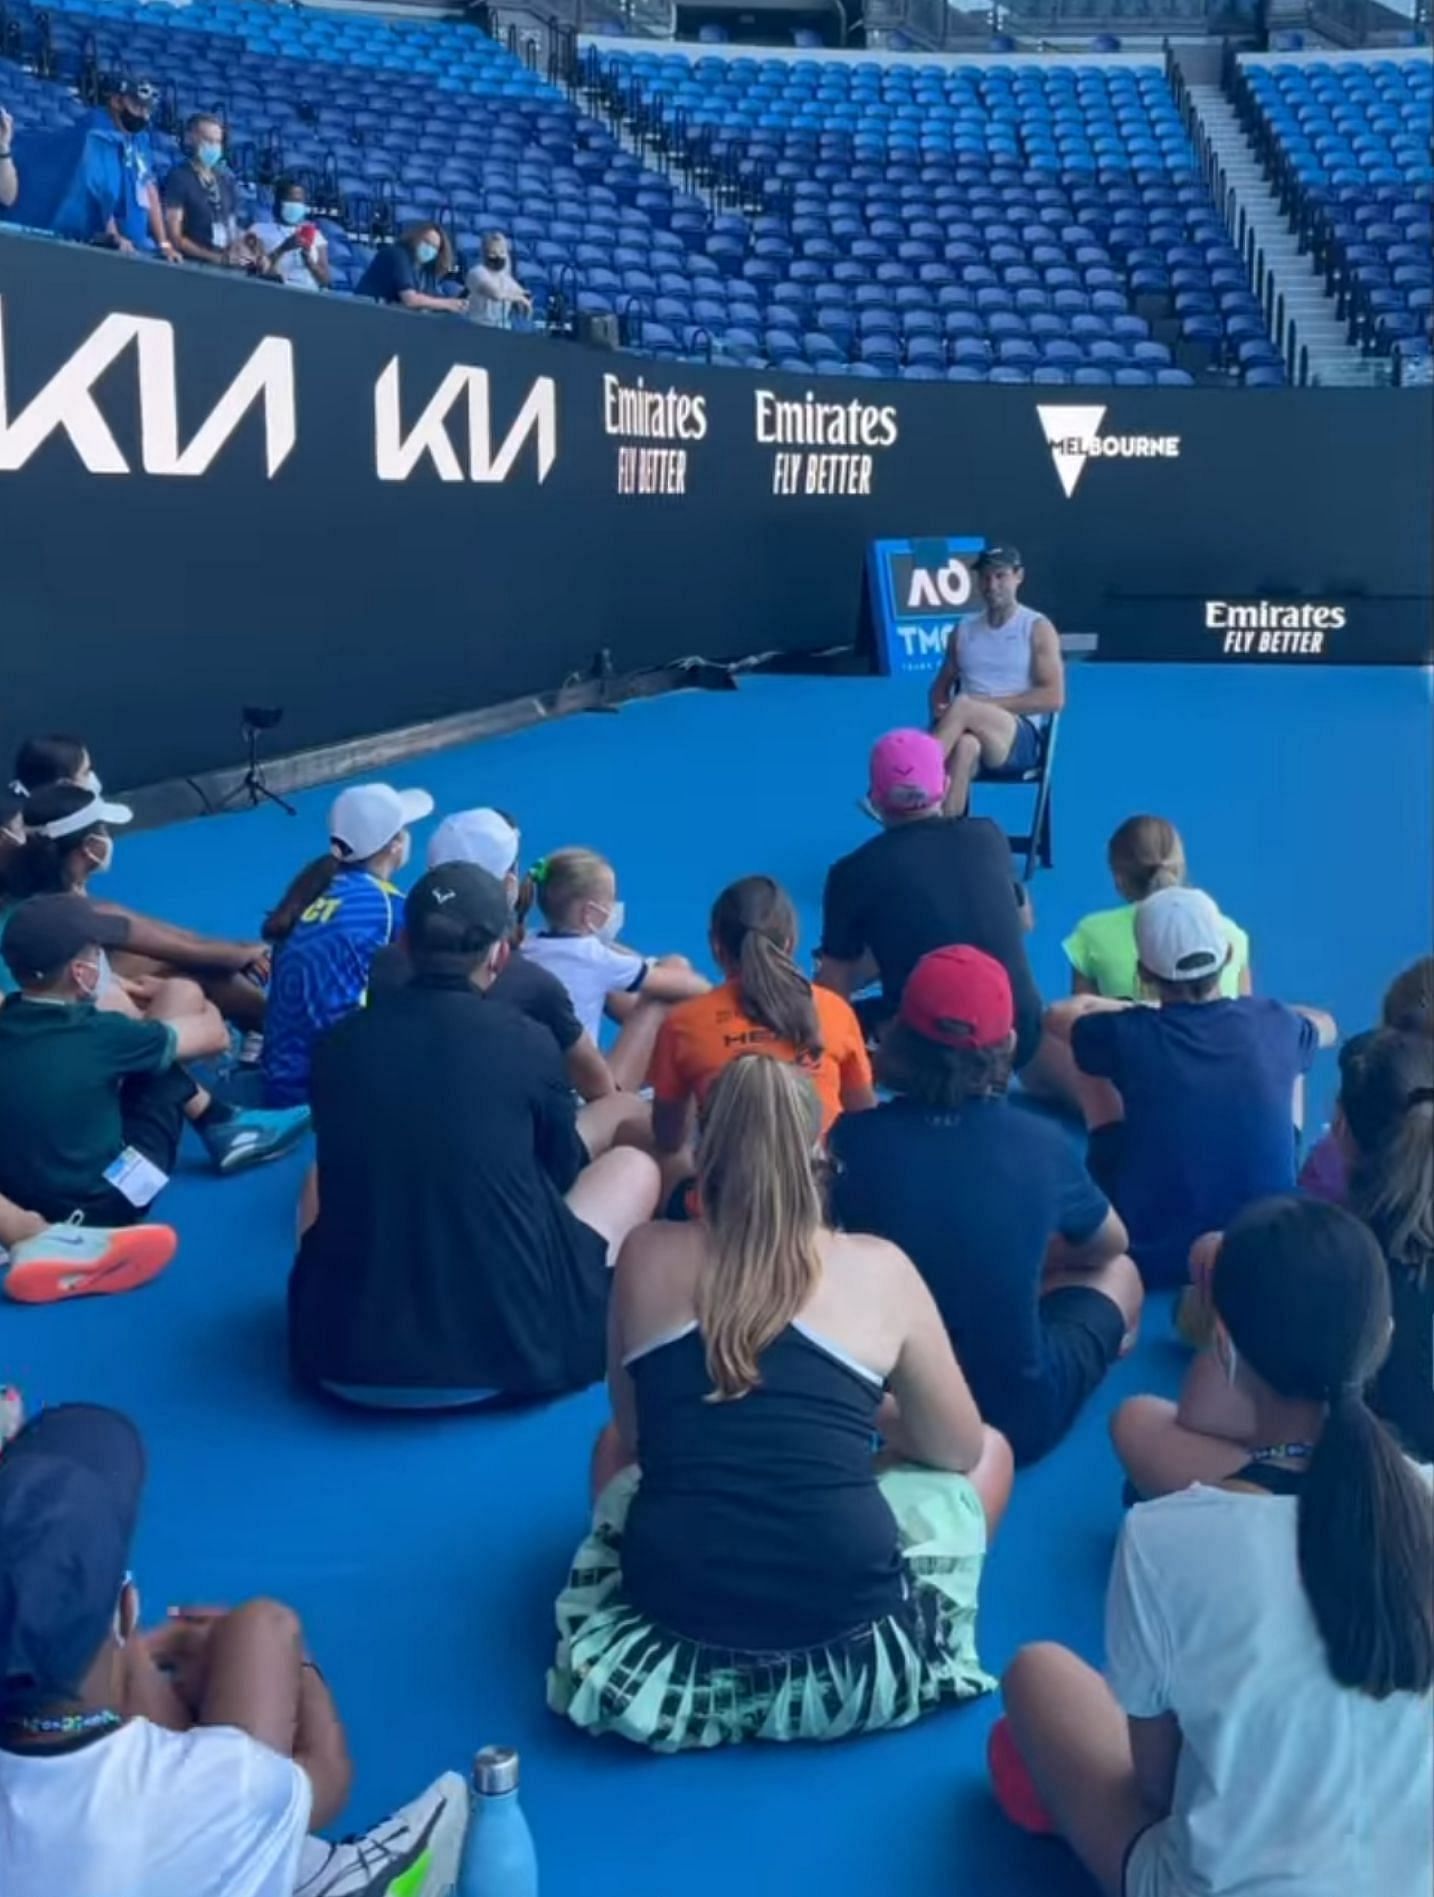 Nadal can be seen giving an orientation to the kids at the Rafa Nadal Australian Tour Masters